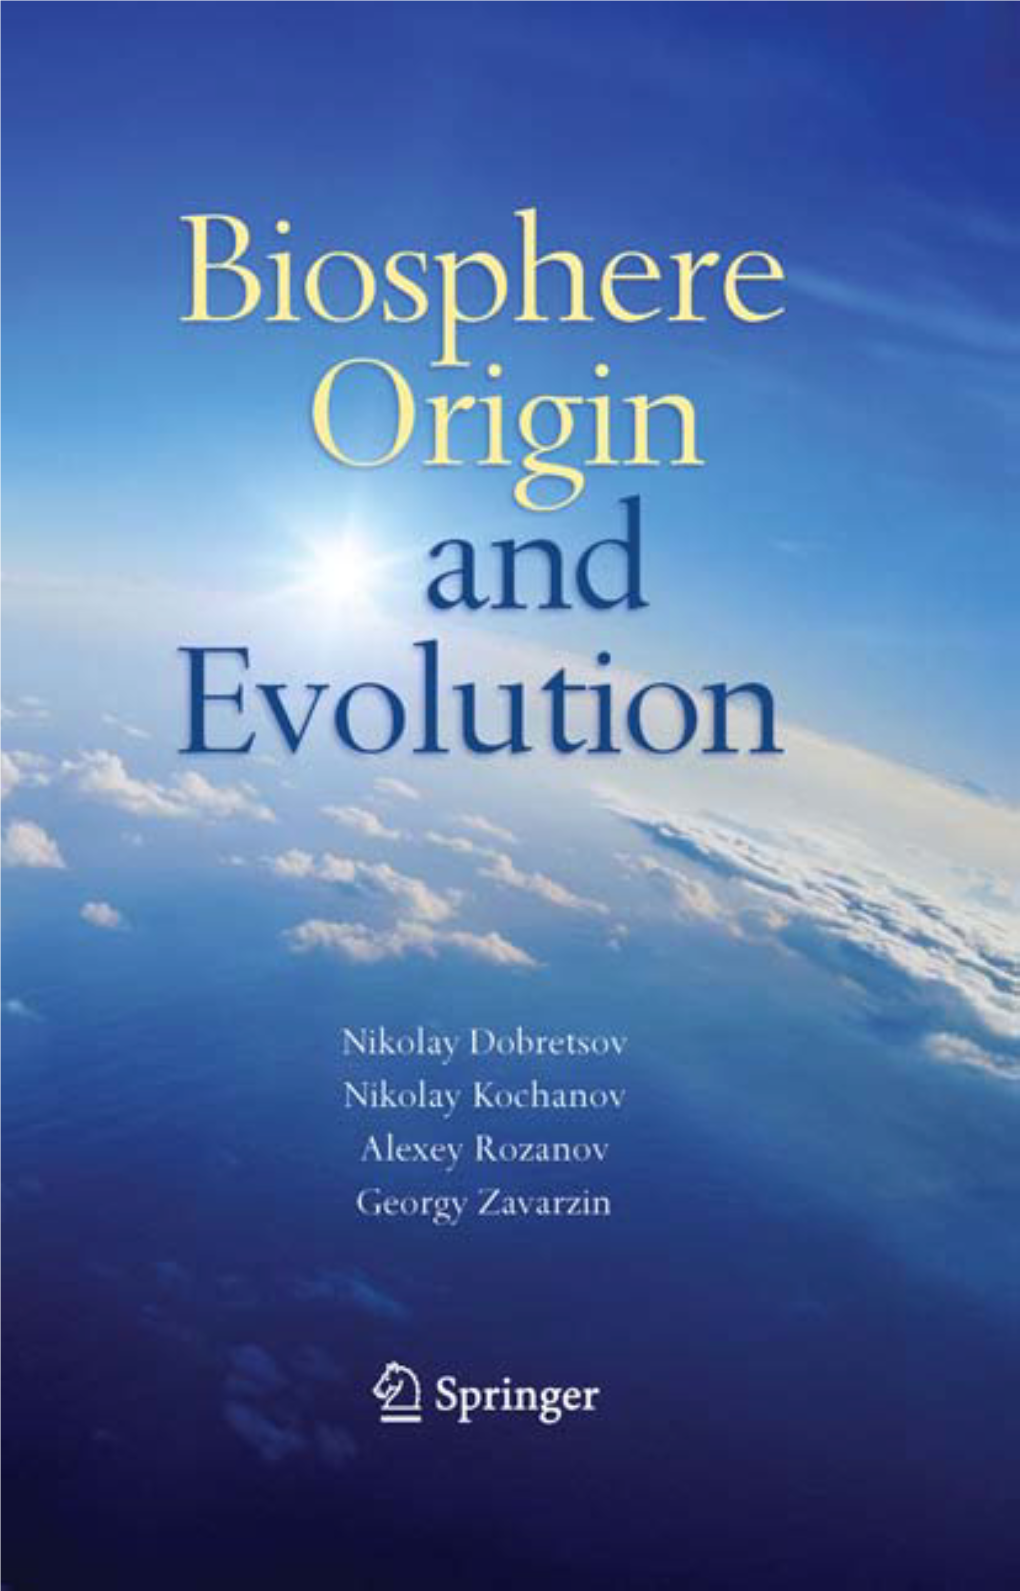 Microbial Biosphere’’ in This Book)